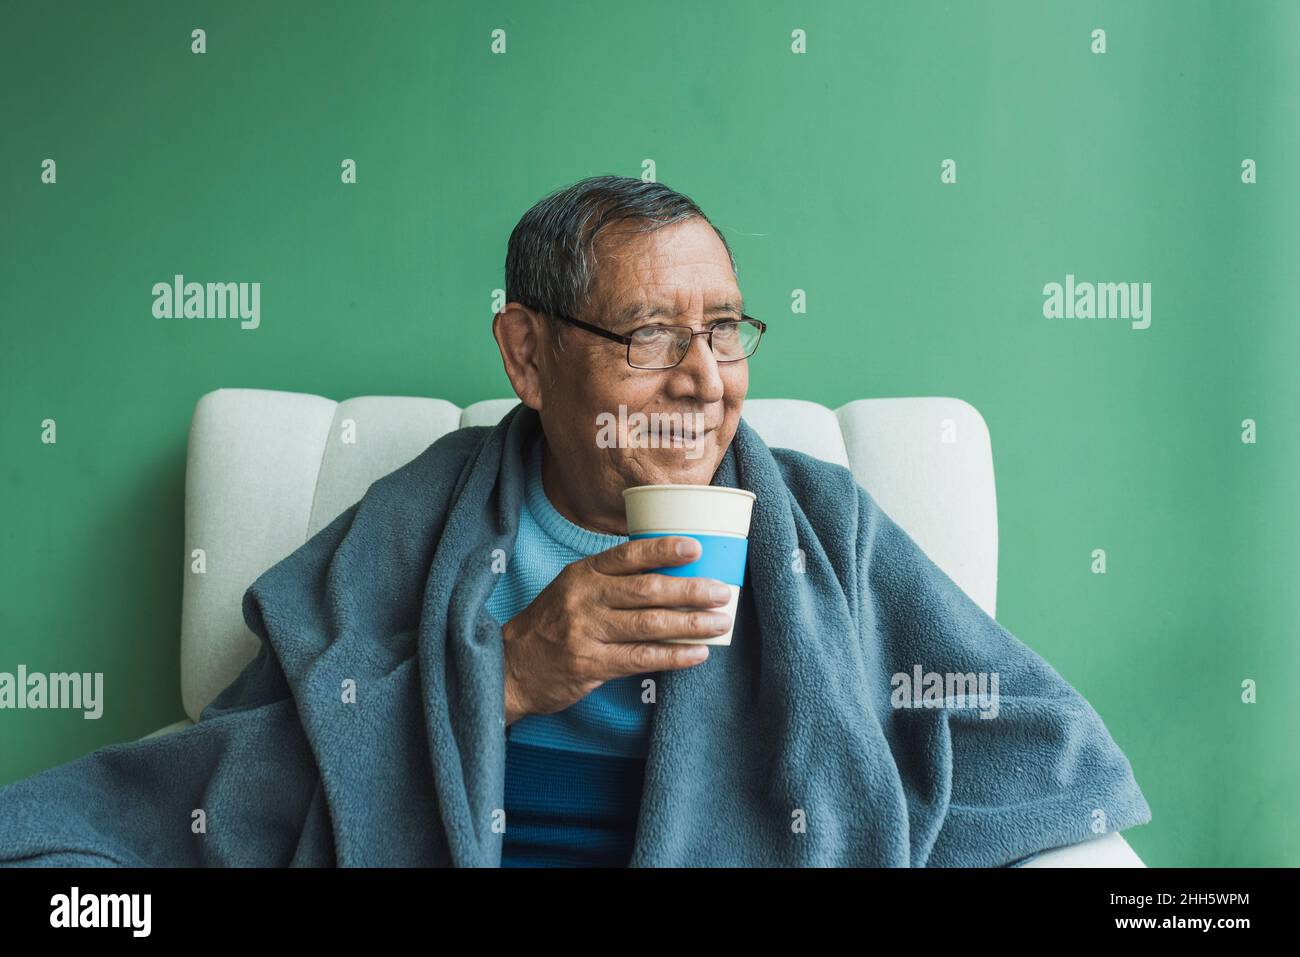 Smiling senior man with disposable coffee cup in front of green wall Stock Photo